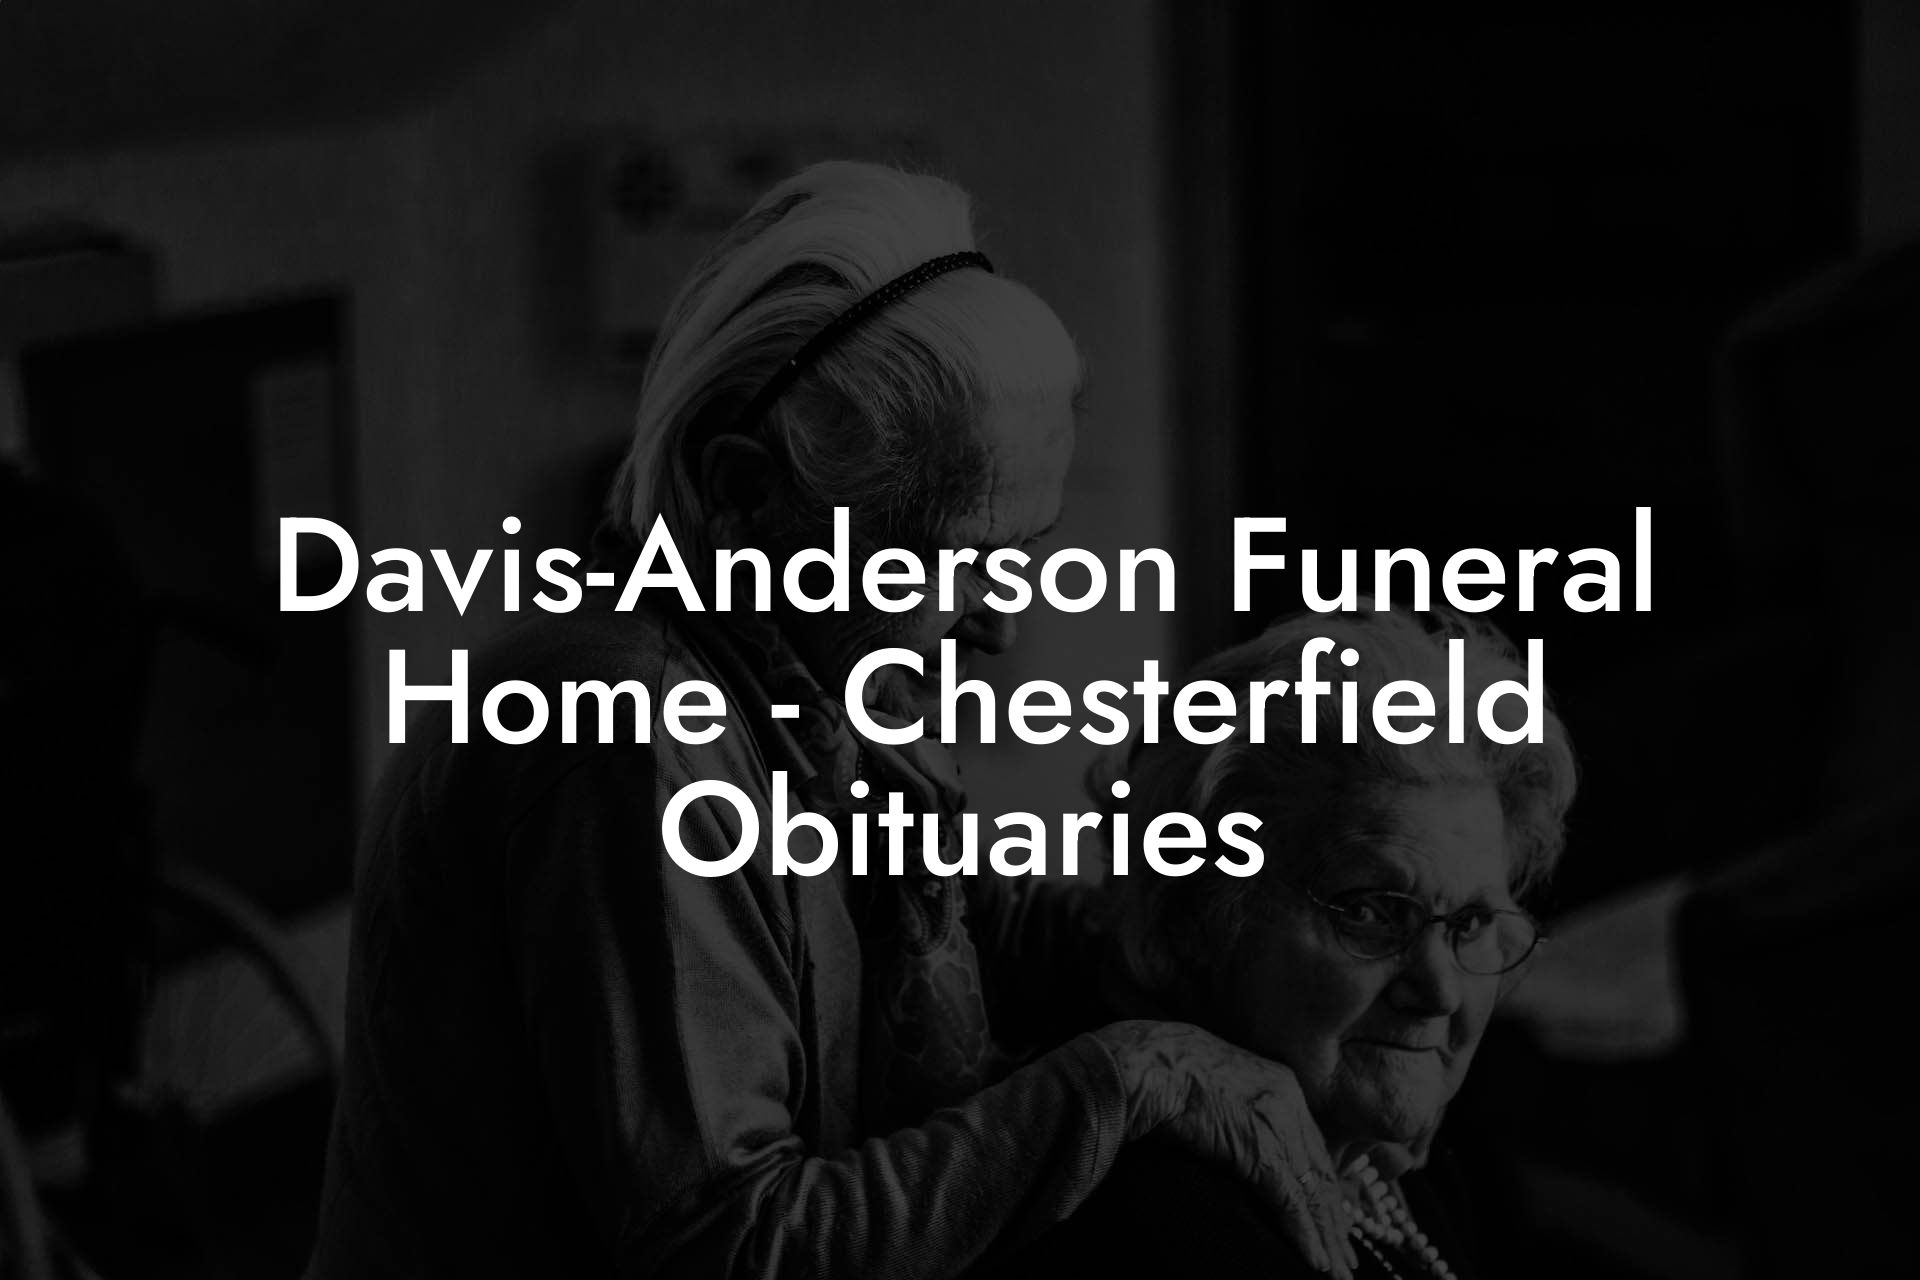 Davis-Anderson Funeral Home - Chesterfield Obituaries